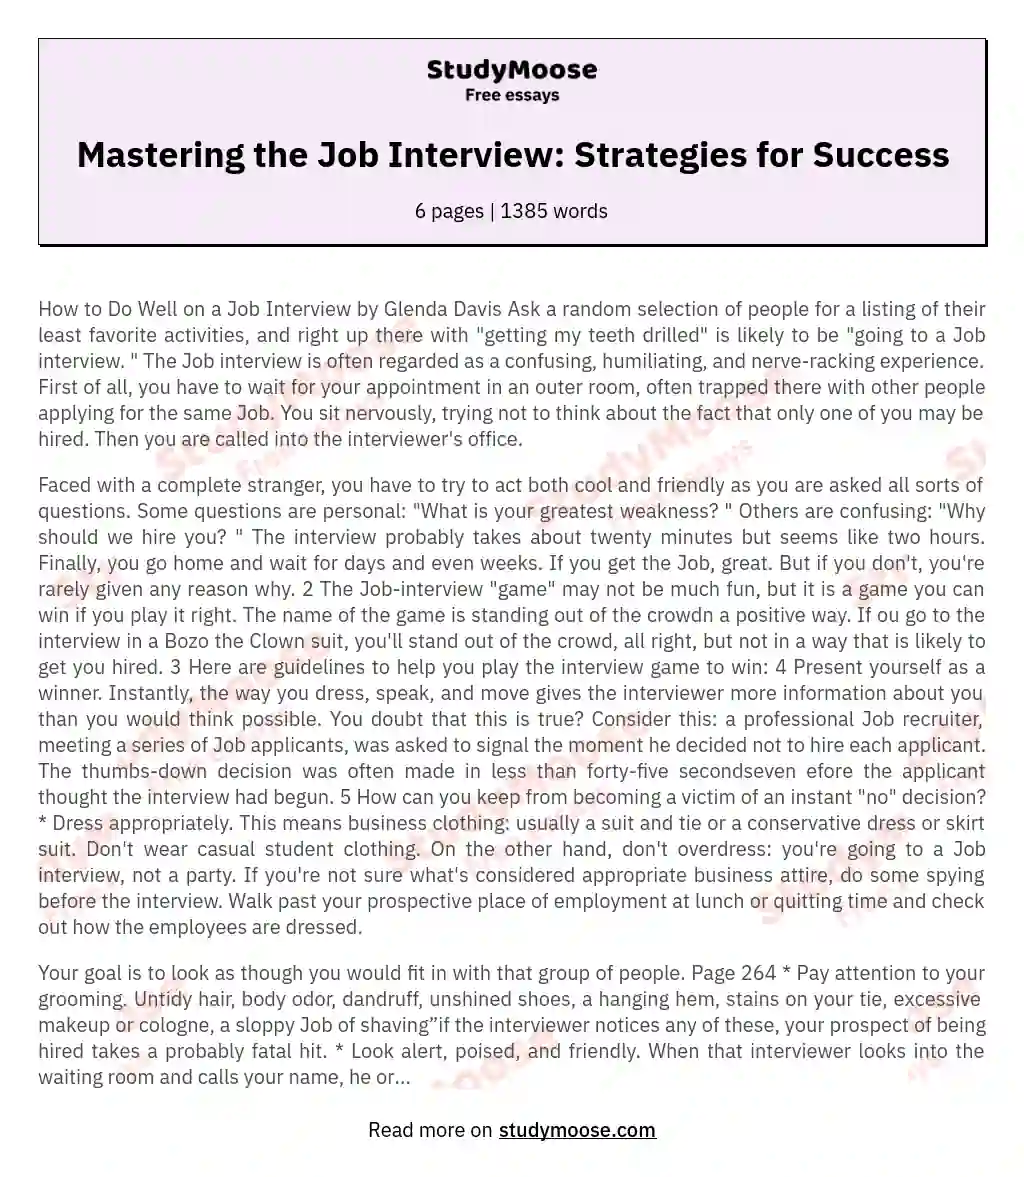 Mastering the Job Interview: Strategies for Success essay